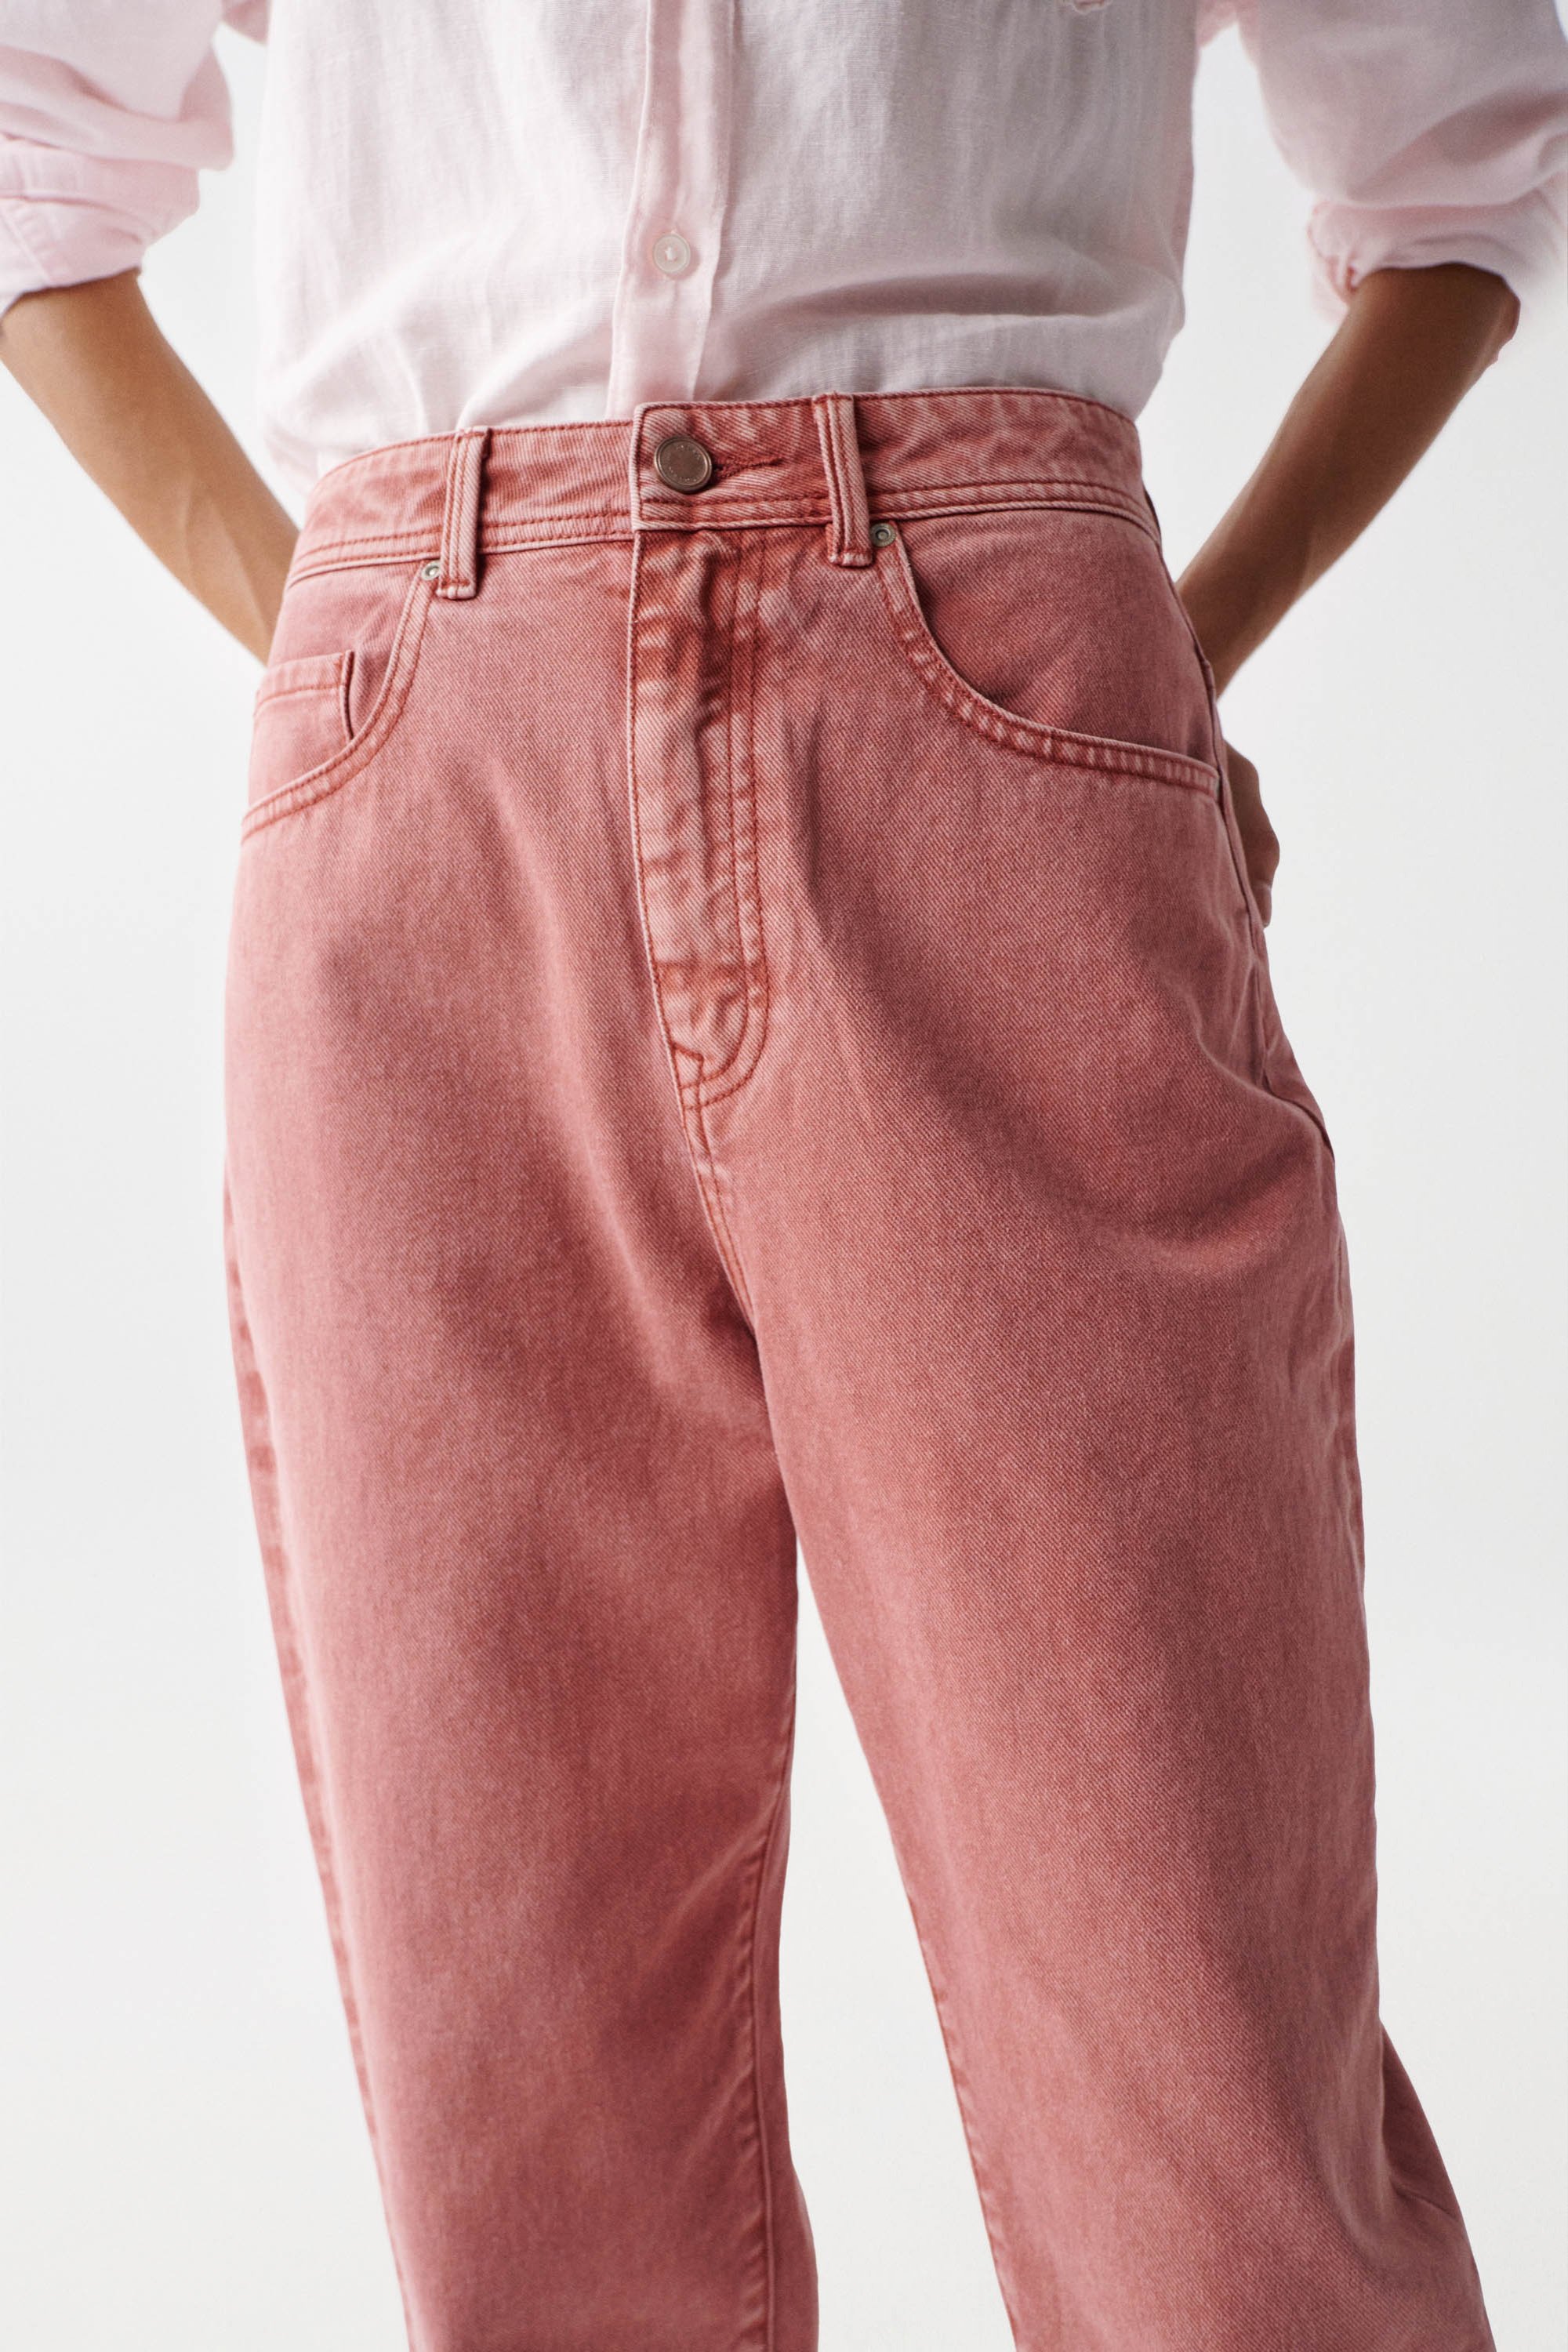 BDG, Pants & Jumpsuits, Bdg Urban Outfitters High Rise Corduroy Mom Pants